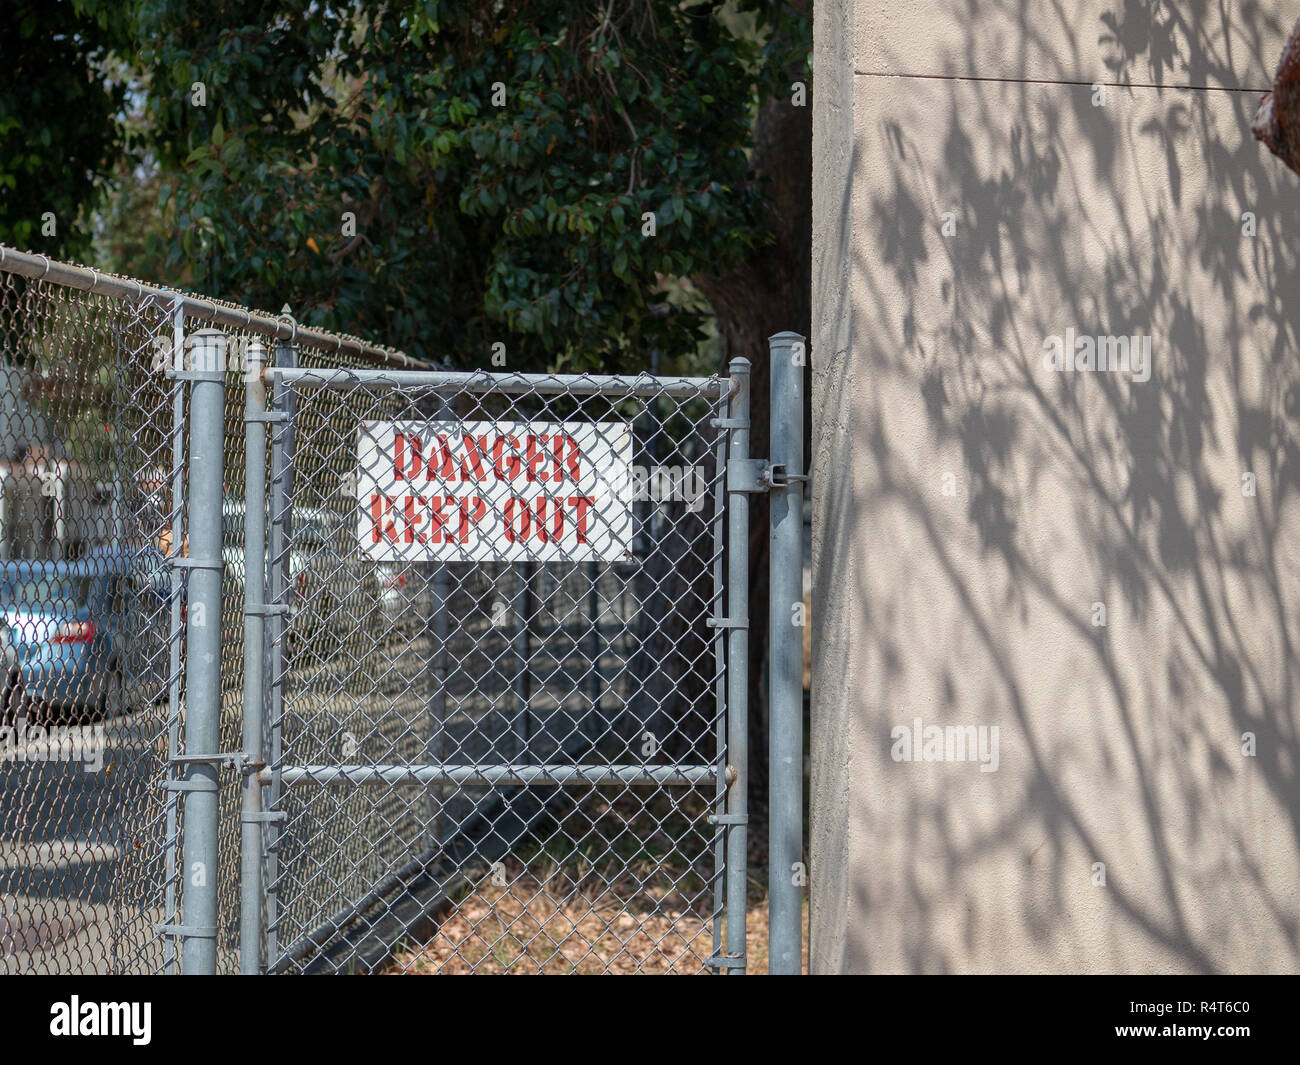 Danger keep out sign behind a residential chain link fence in residential area Stock Photo